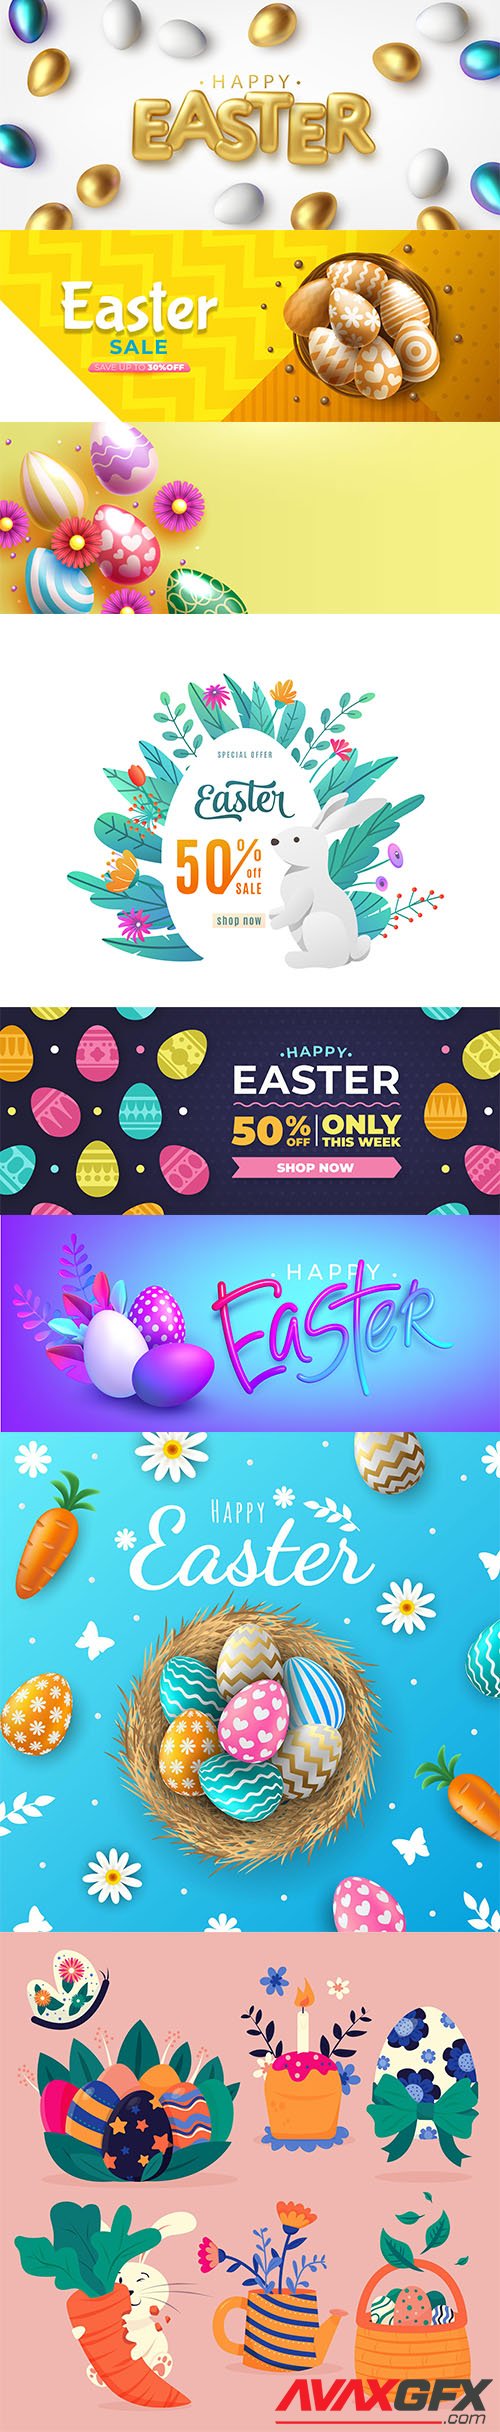 Hand-drawn cute easter illustrations and banner vol 4